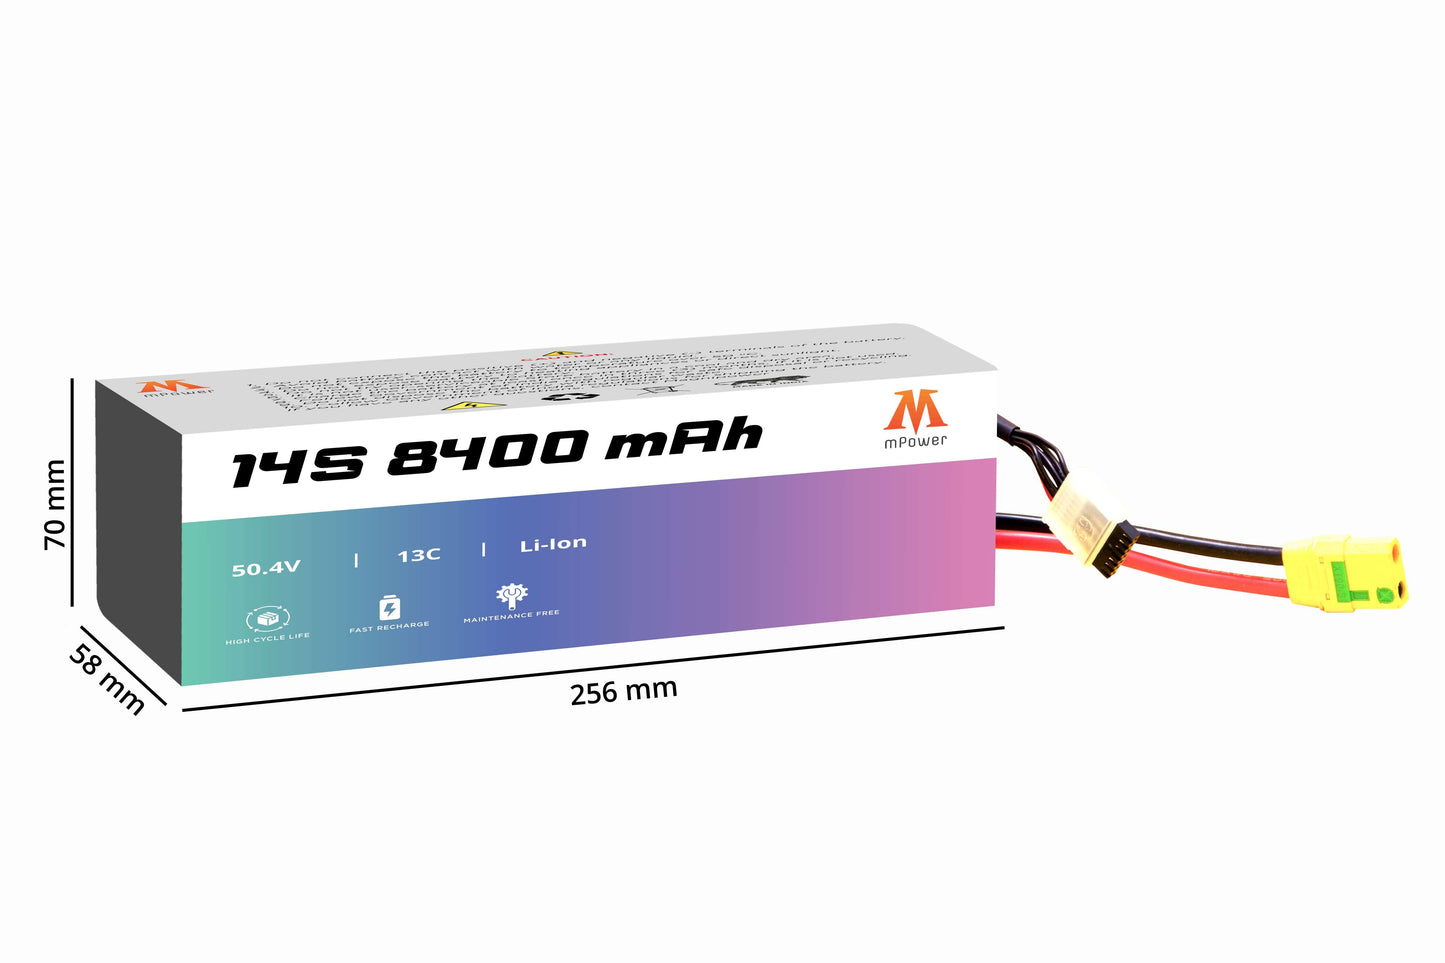 mPower 14S 8400mAh 13C Lithium-Ion Battery for Surveillance Drones